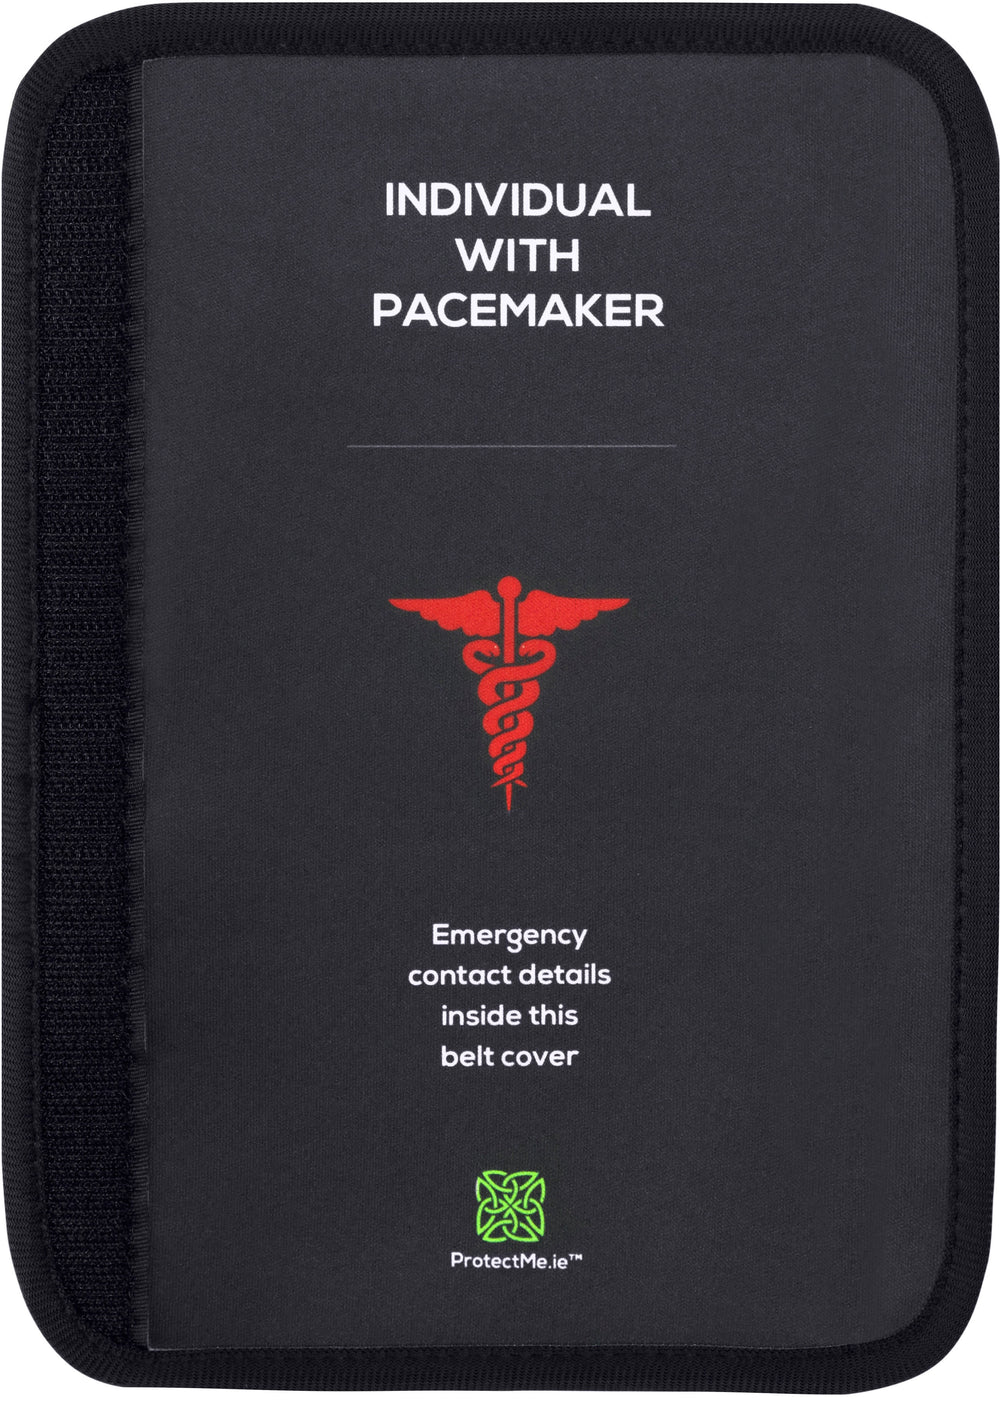 Protect Me - Seatbelt Cover - Individual with Pacemaker - Black_1